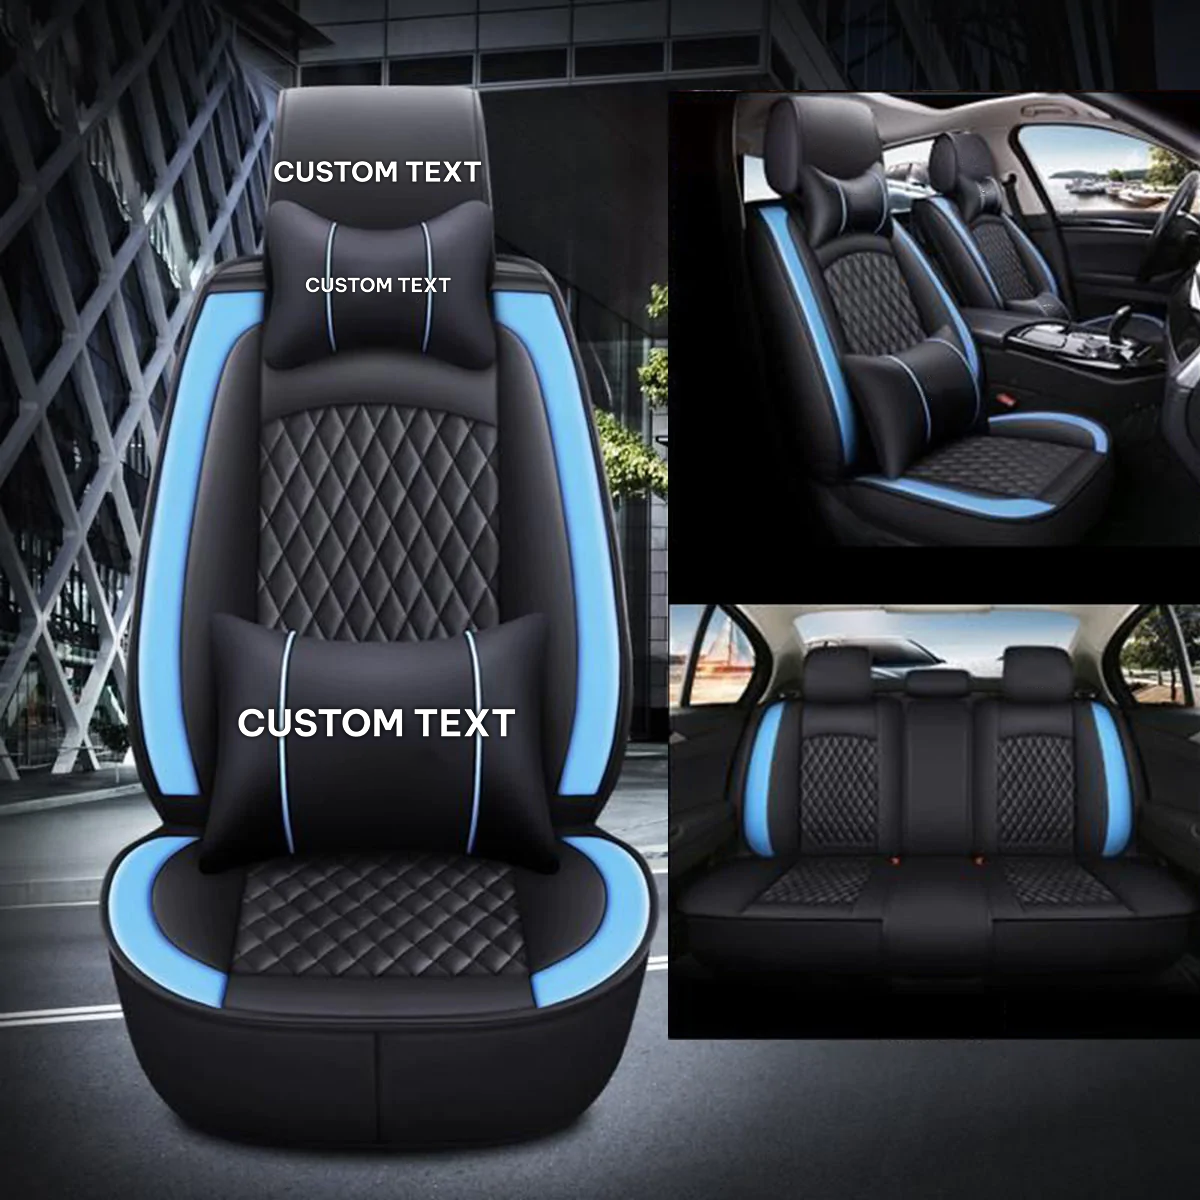 Custom Text For Seat Covers 5 Seats Full Set, Custom Fit For Your Cars, Leatherette Automotive Seat Cushion Protector Universal Fit, Vehicle Auto Interior Decor KX13988